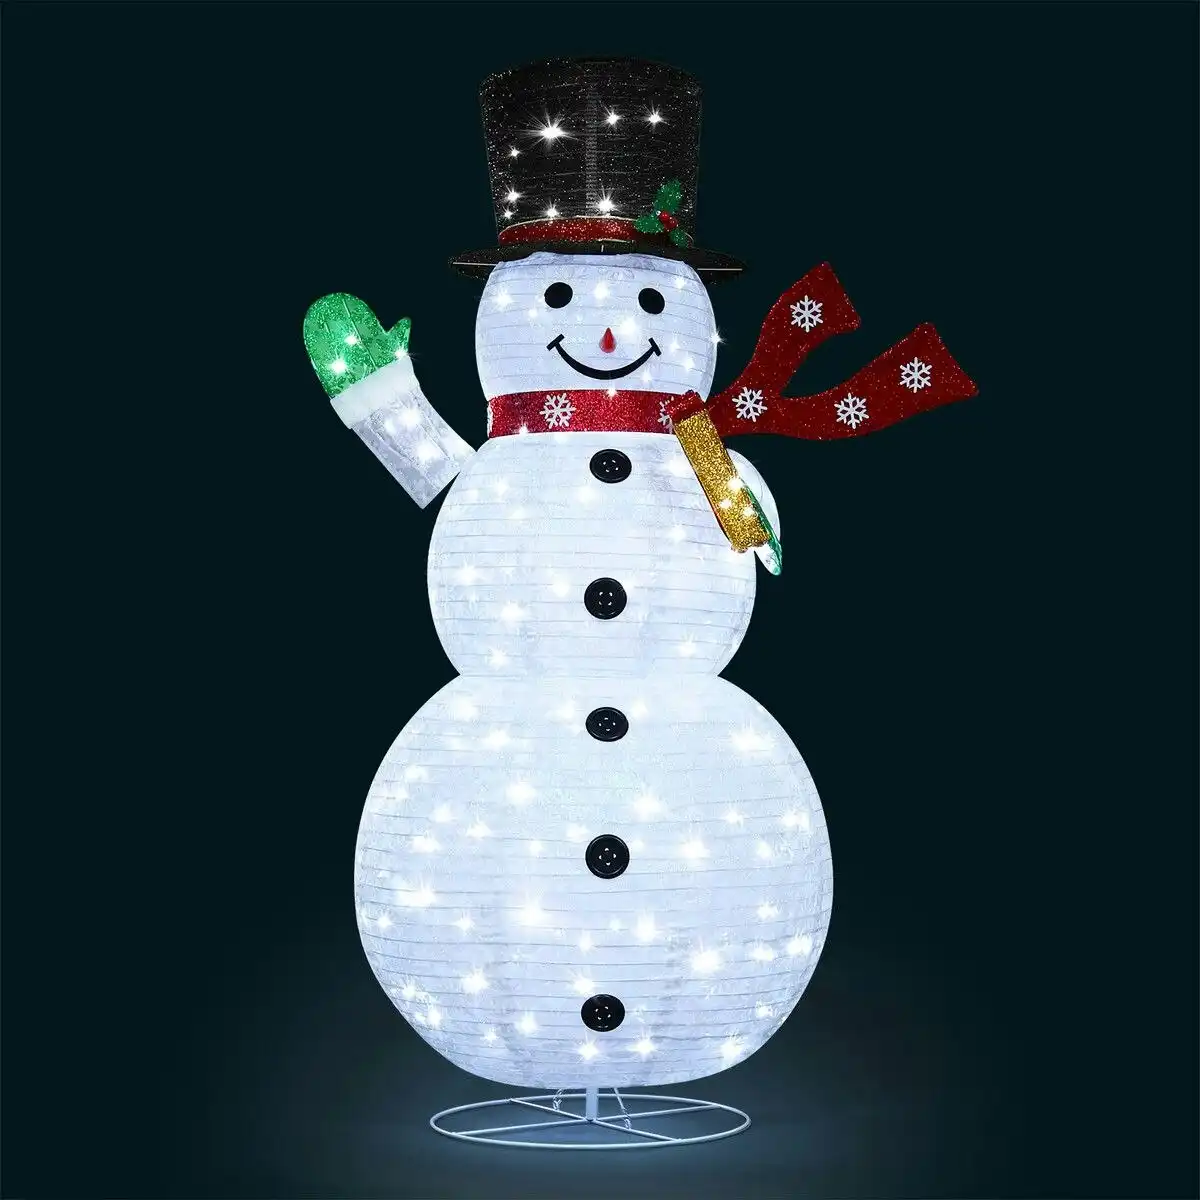 Solight 180cm Christmas Light Snowman Decoration 200 LED Strip Home Display Outdoor Xmas Holiday House Ornament Folding 8 Flickering Effects